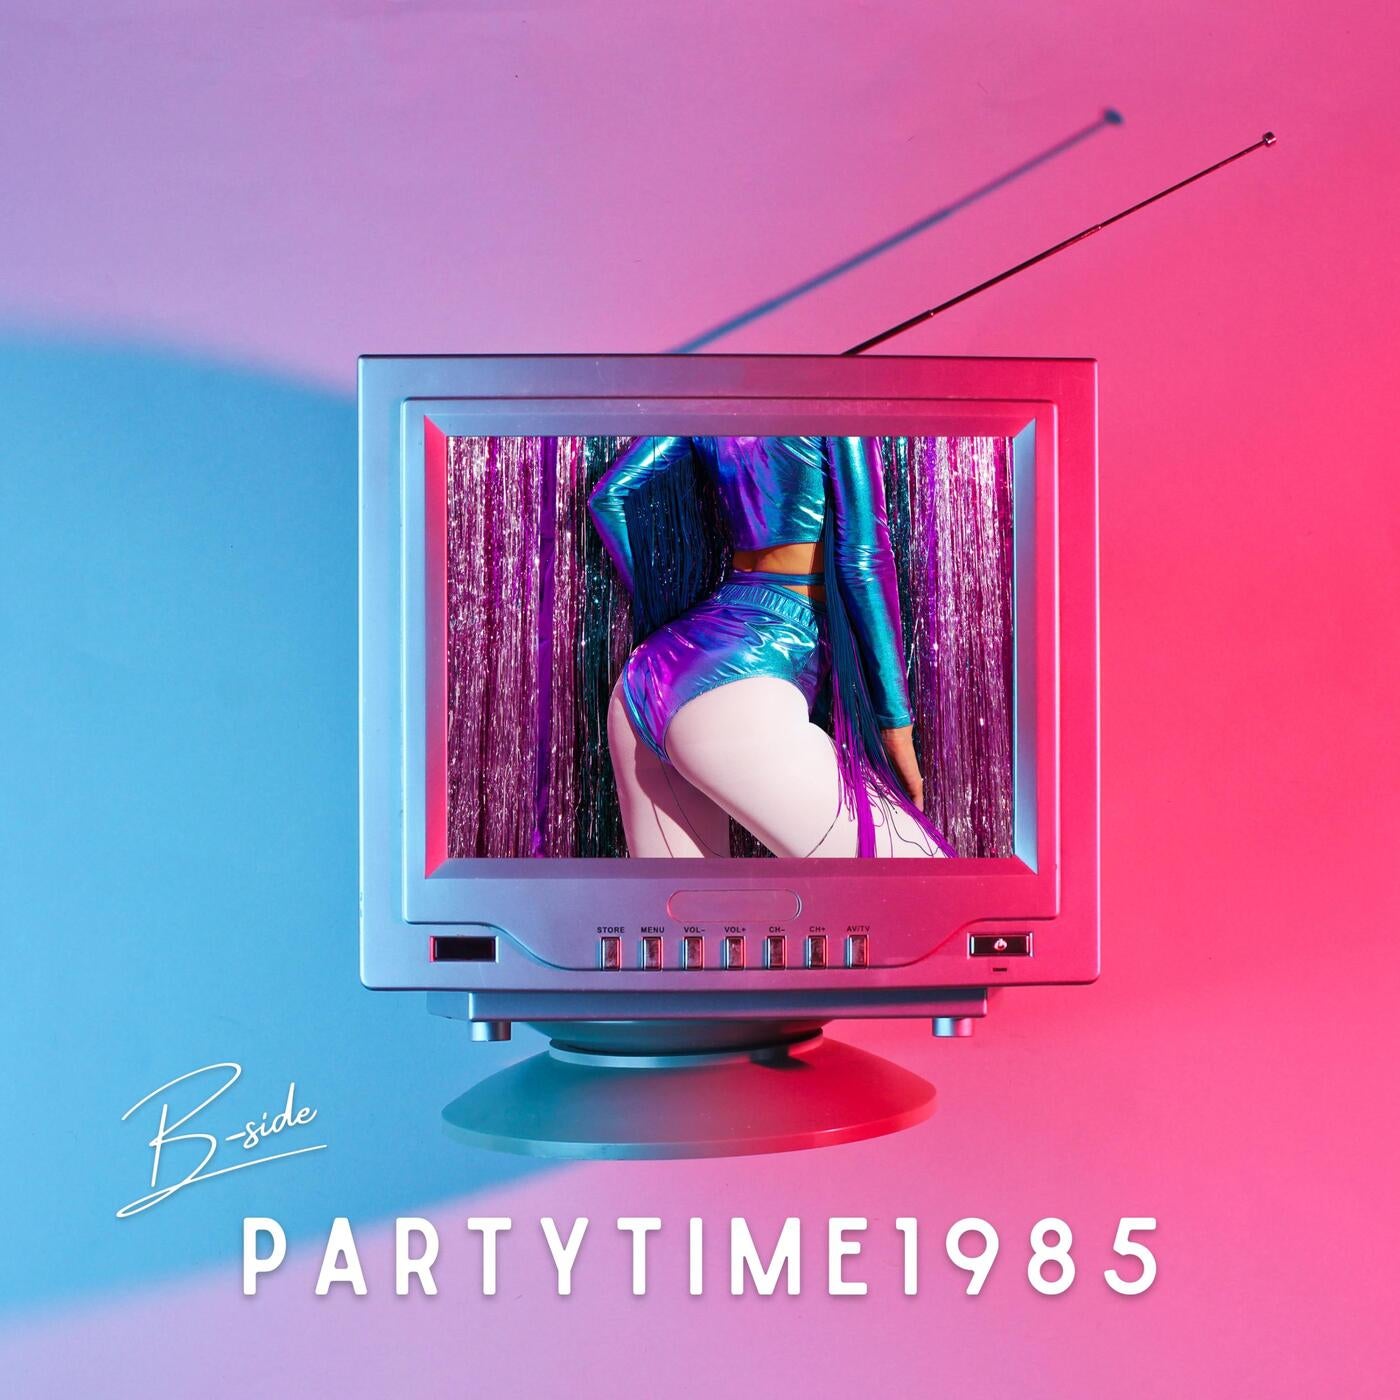 Partytime1985